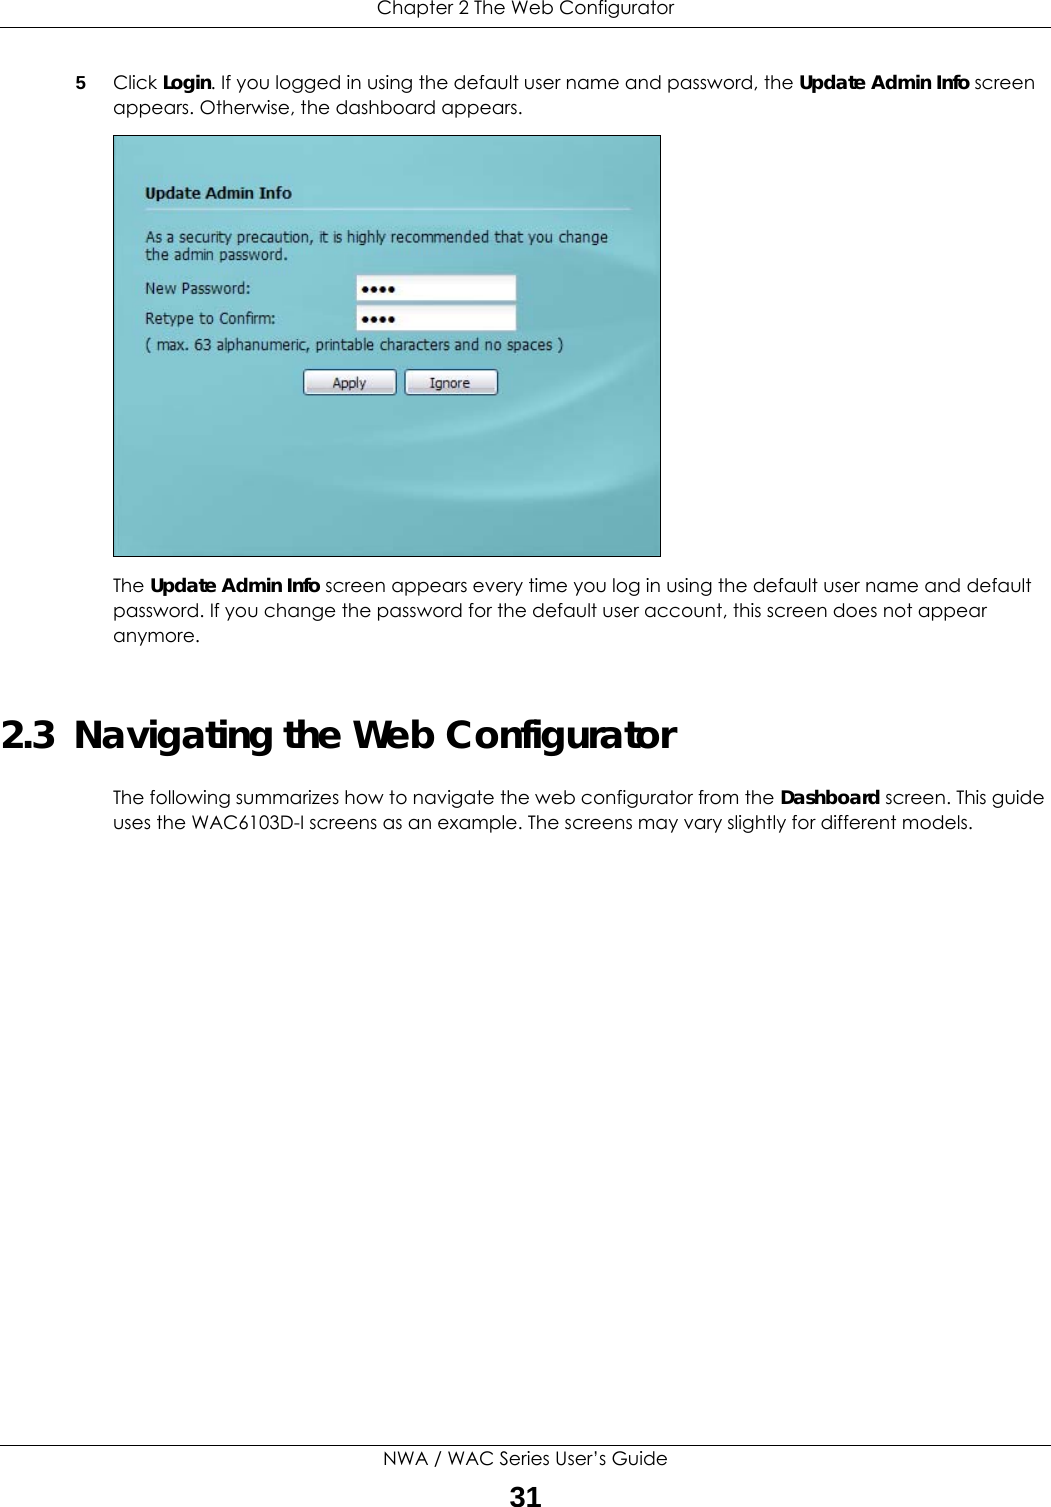 Chapter 2 The Web ConfiguratorNWA / WAC Series User’s Guide315Click Login. If you logged in using the default user name and password, the Update Admin Info screen appears. Otherwise, the dashboard appears. The Update Admin Info screen appears every time you log in using the default user name and default password. If you change the password for the default user account, this screen does not appear anymore.2.3  Navigating the Web ConfiguratorThe following summarizes how to navigate the web configurator from the Dashboard screen. This guide uses the WAC6103D-I screens as an example. The screens may vary slightly for different models.